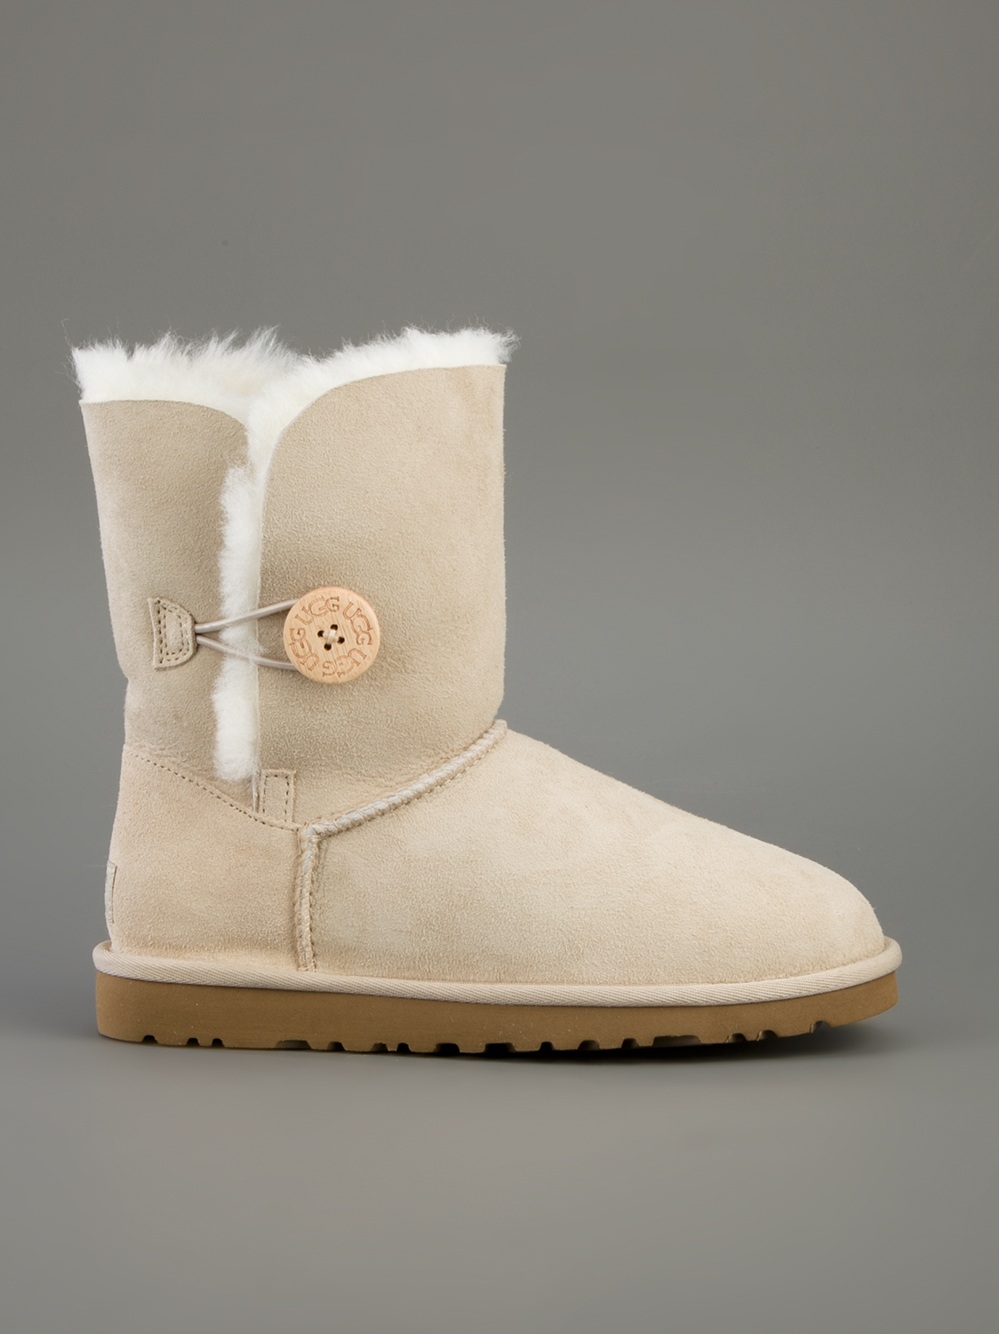 Lyst - Ugg Bailey Button Boot in Natural